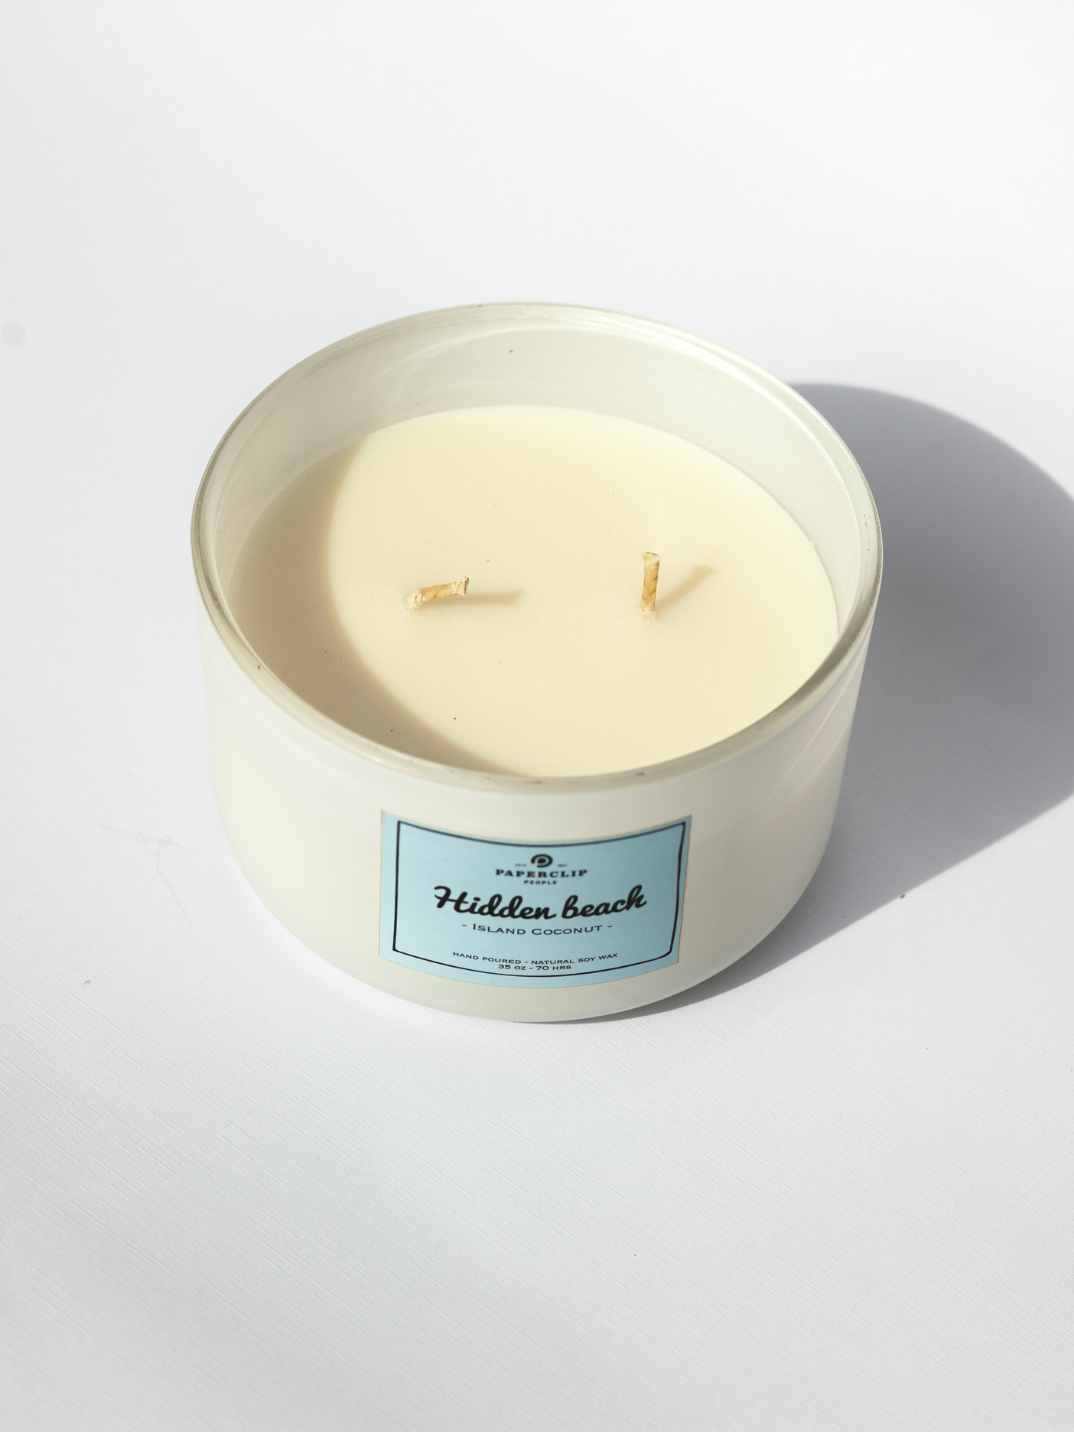 hidden beach soy wax candle handmade in Bali natural hand-poured burn time 75 hours